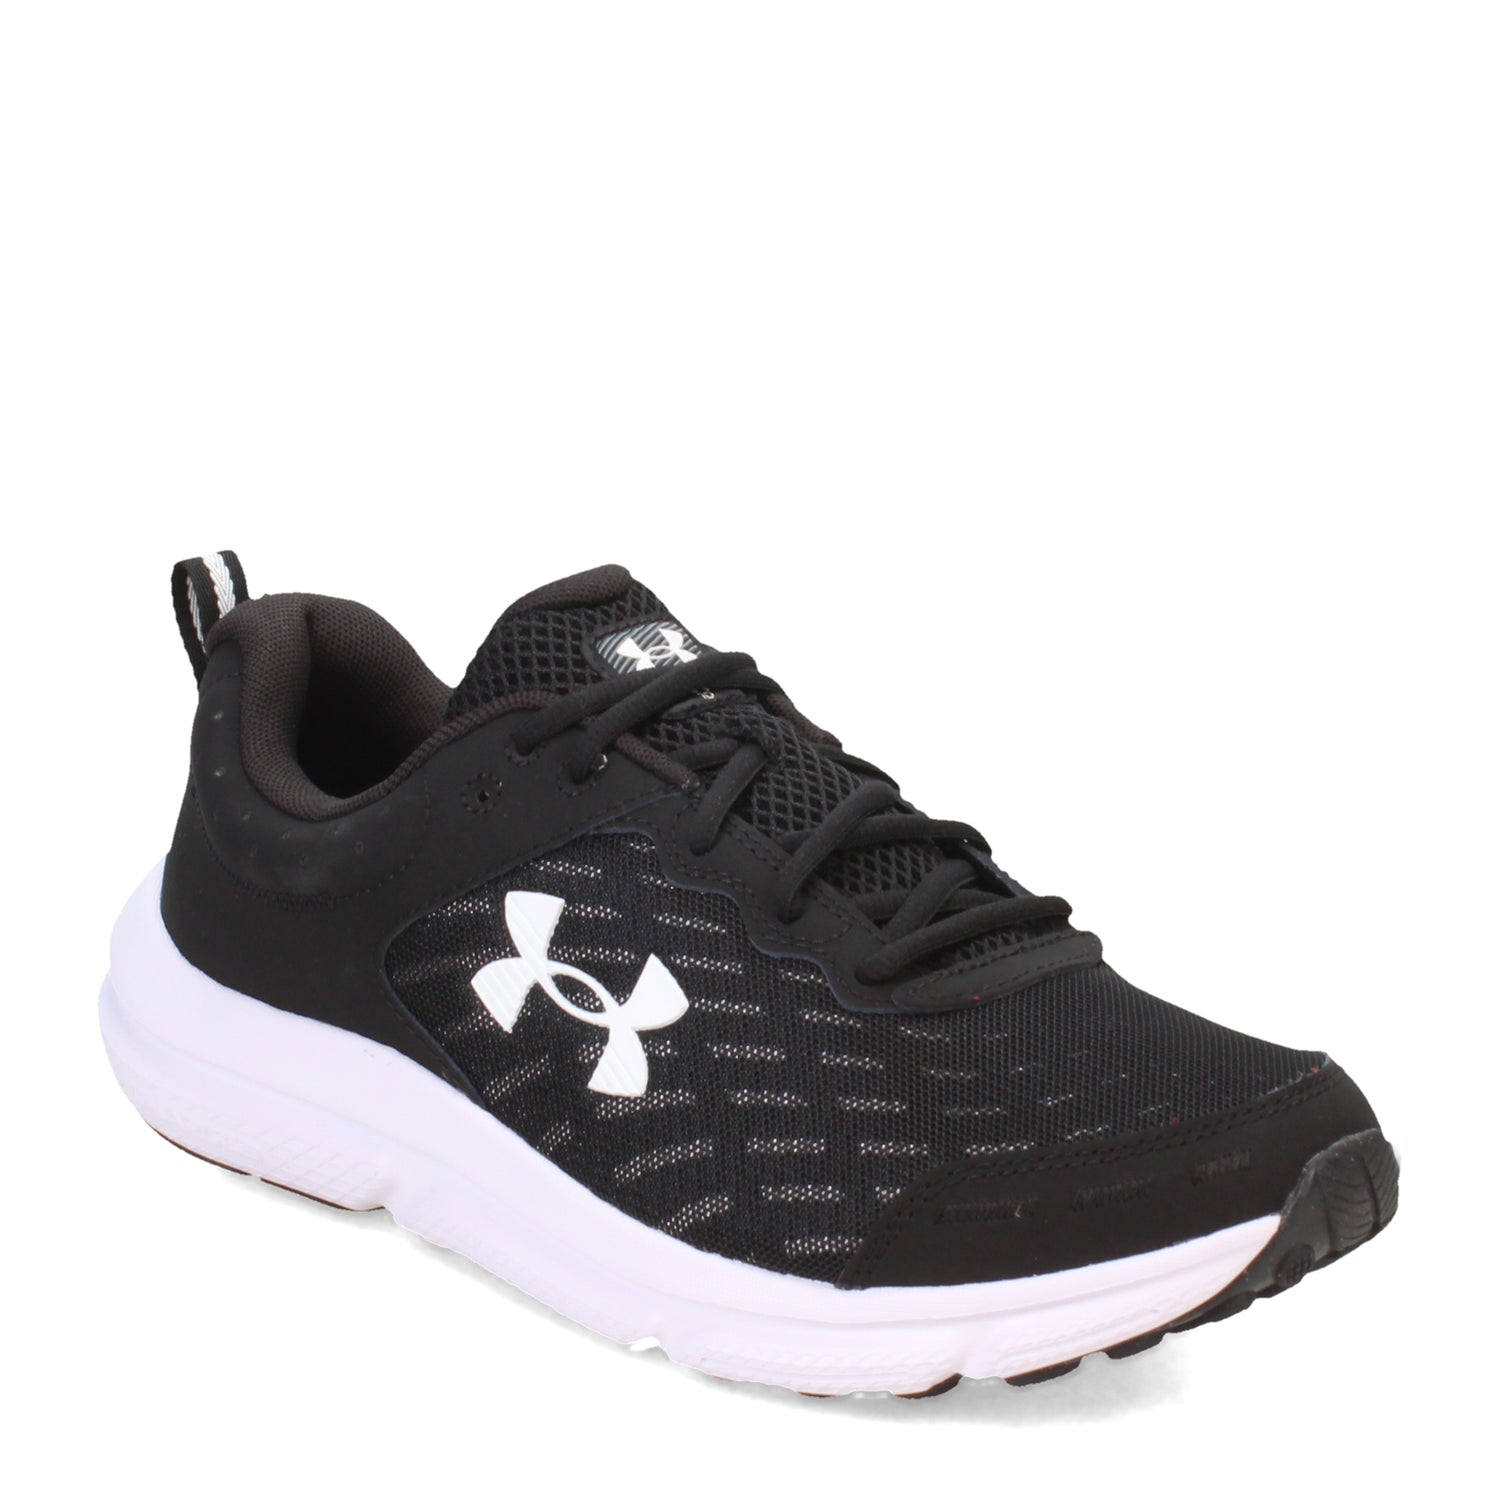 Women's Charged Assert 10 Running Shoes from Under Armour